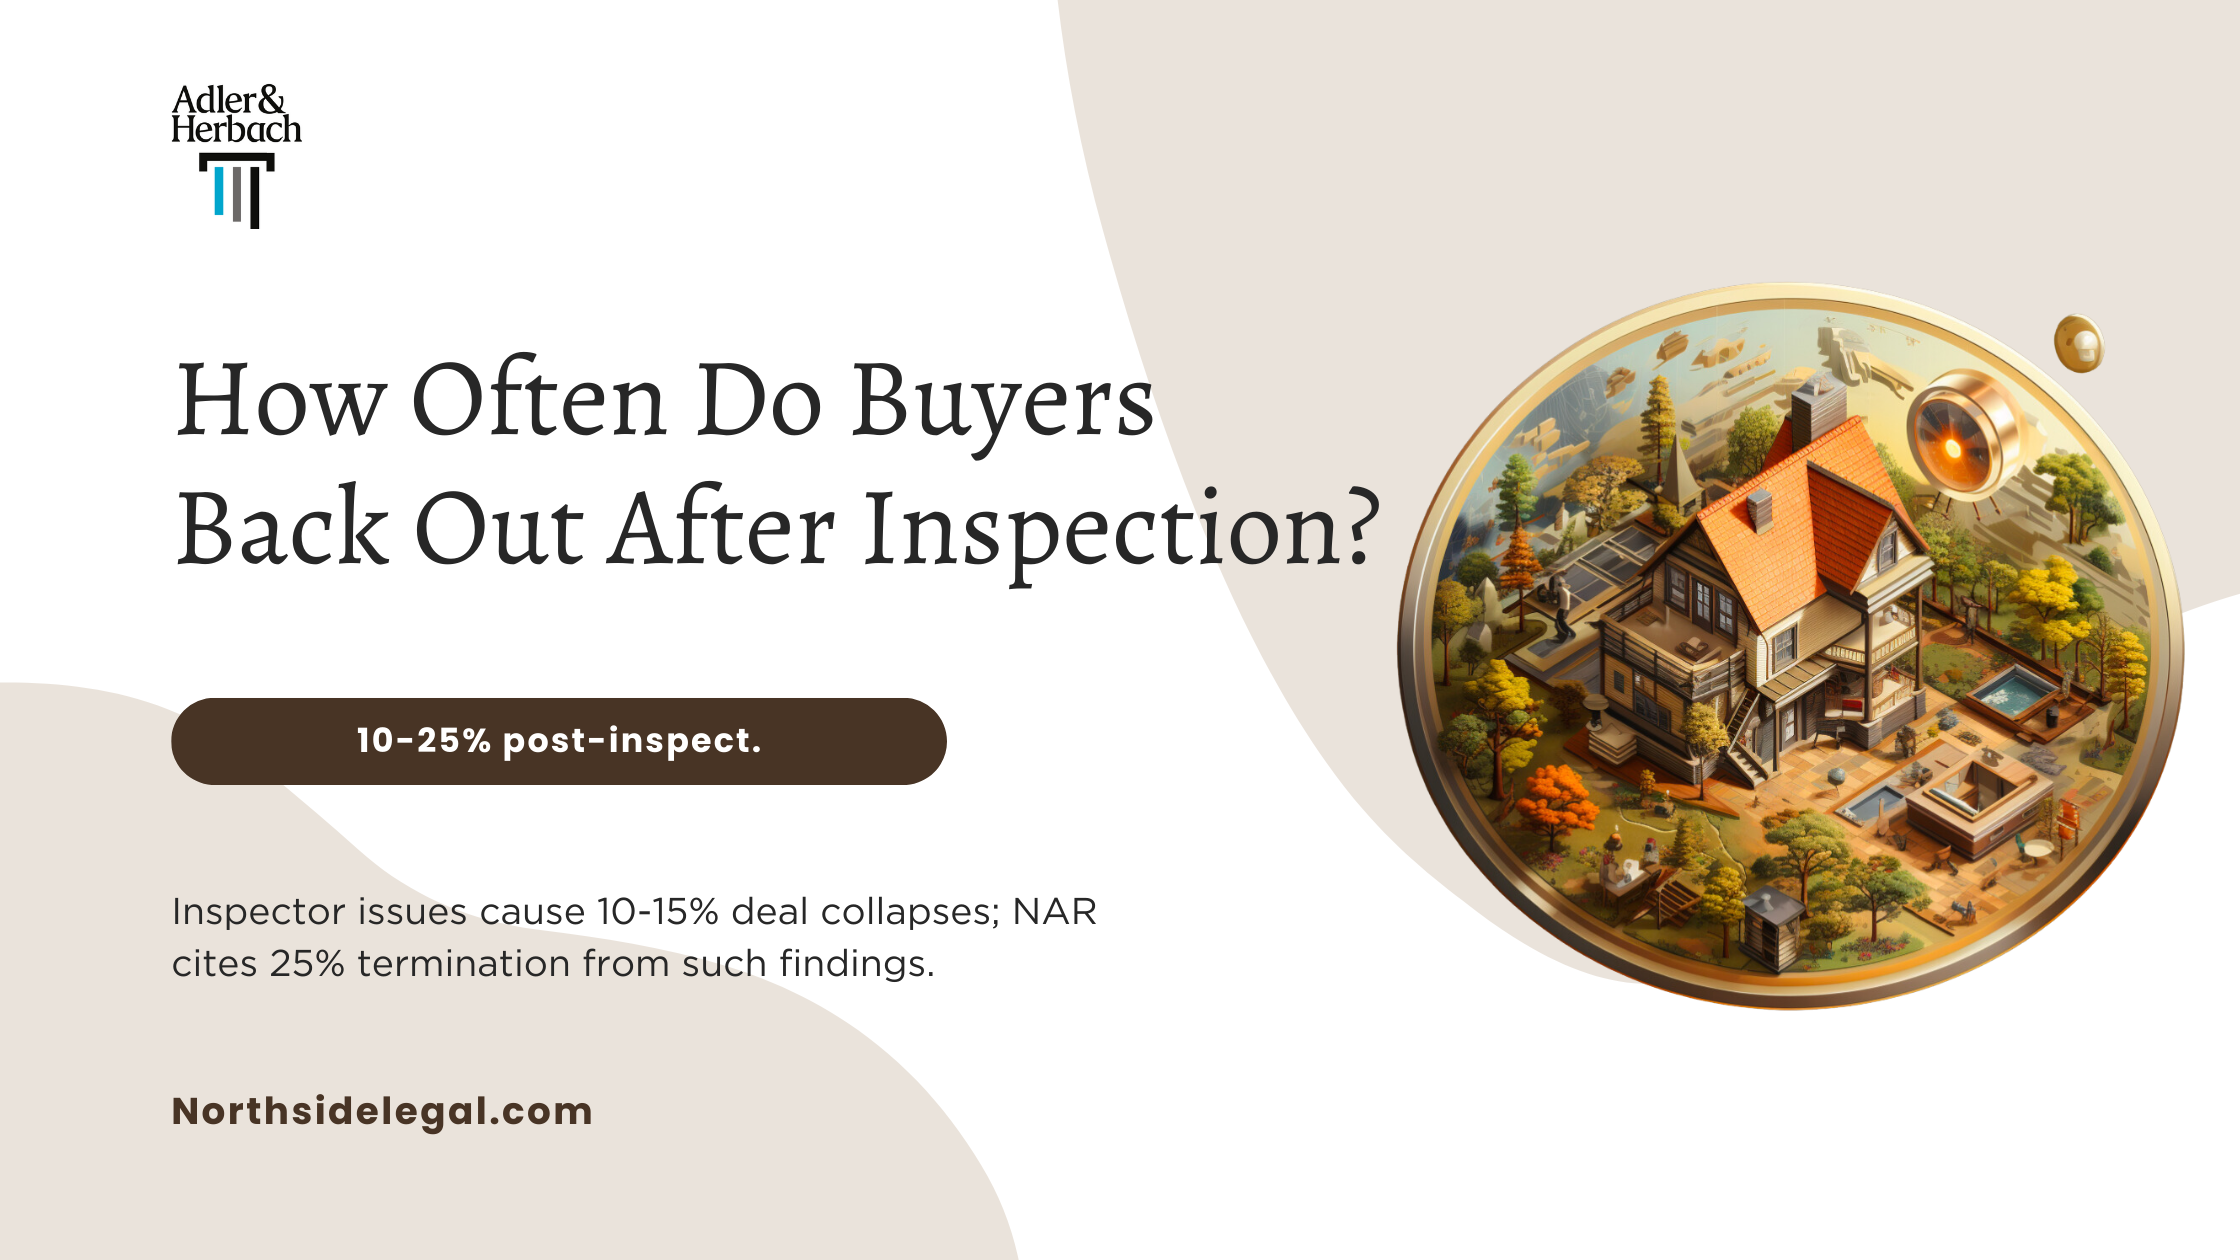 How Often Do Buyers Back Out After Inspection?